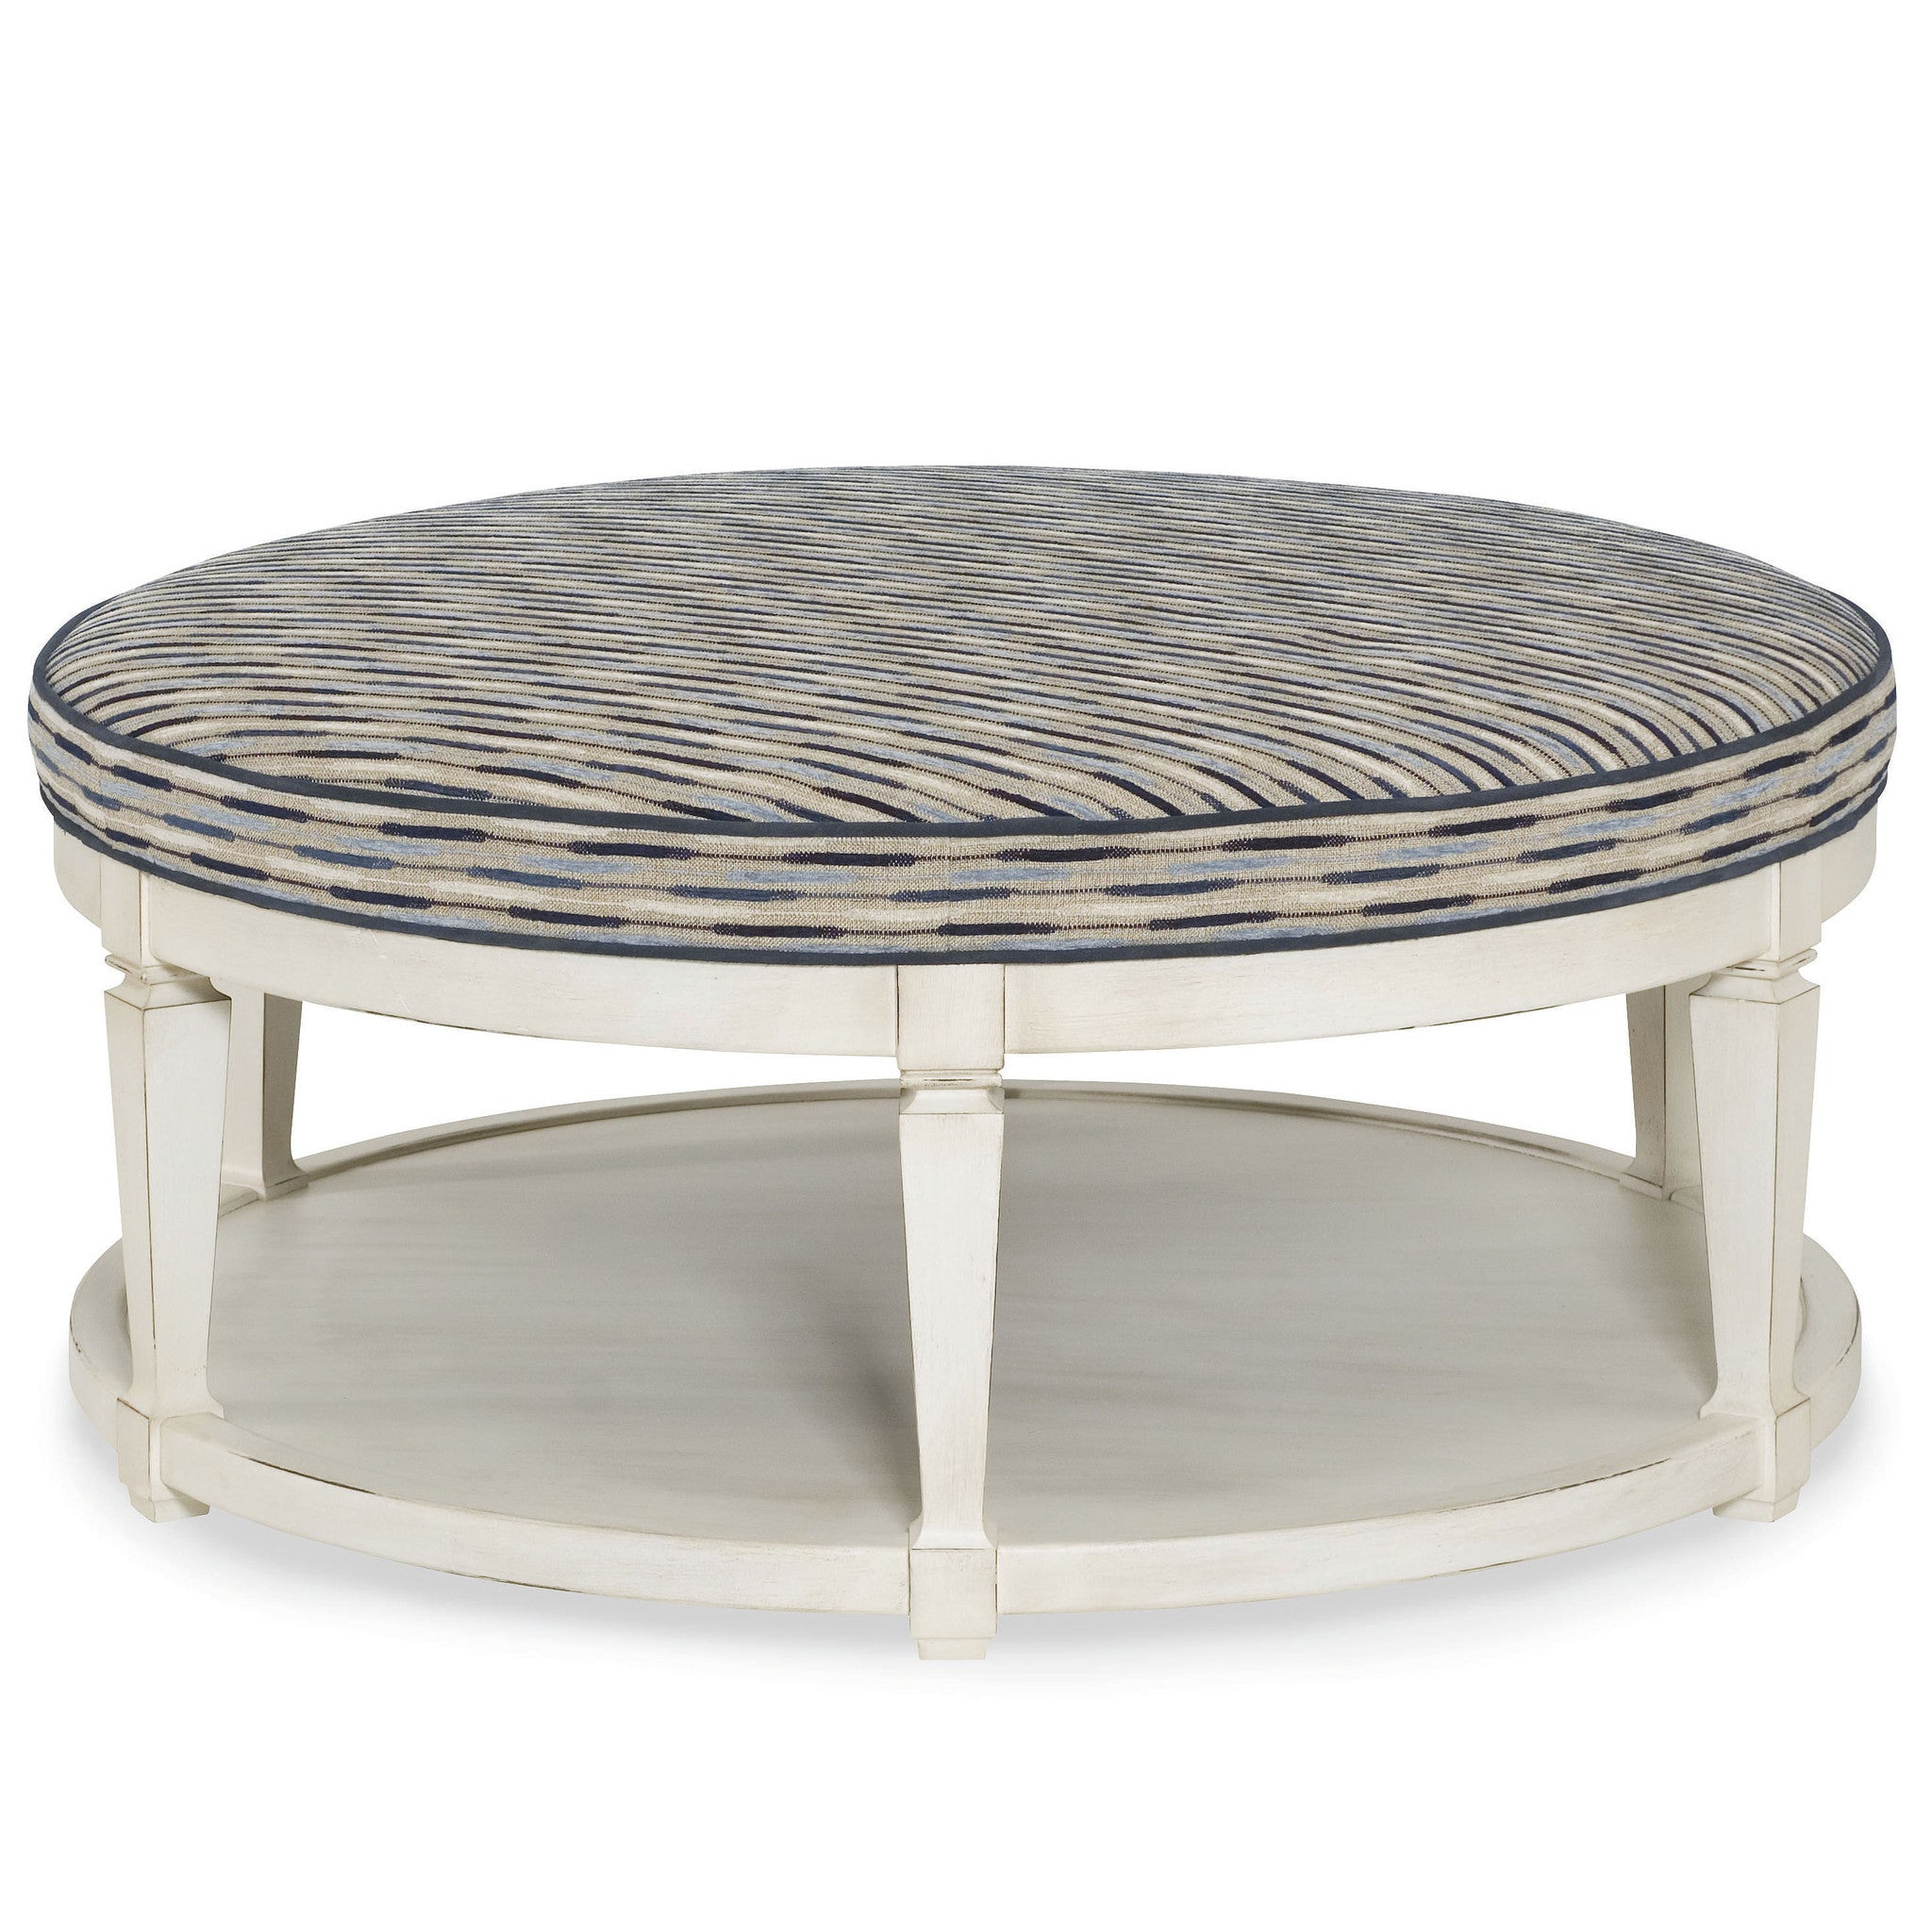 Carrie Table Ottoman in Vancamp Navy by Wesley Hall